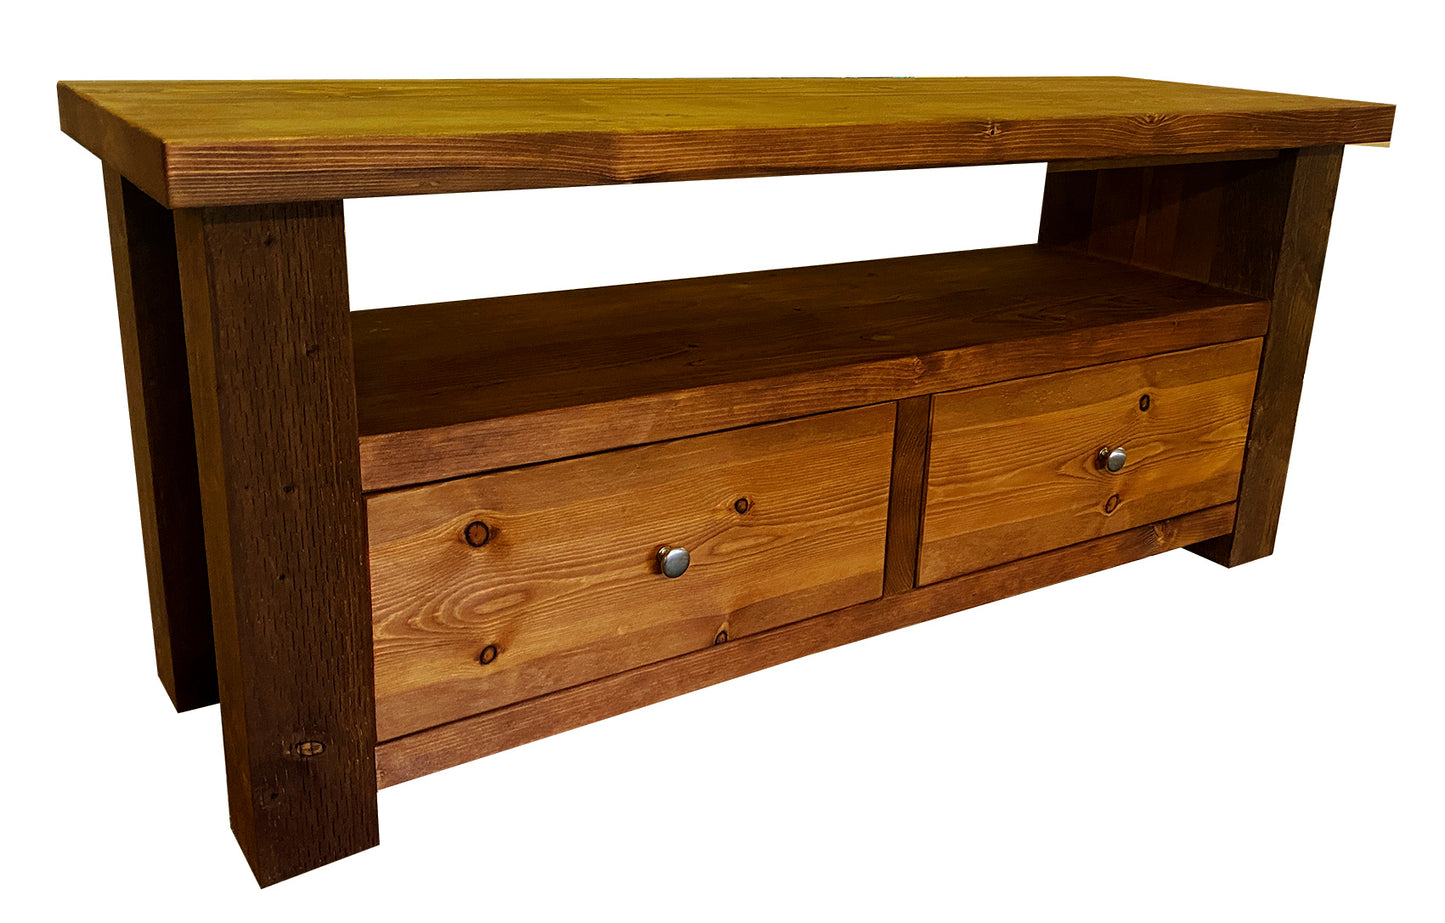 This is a beautiful handmade Television cabinet with full width front and double opening drawers